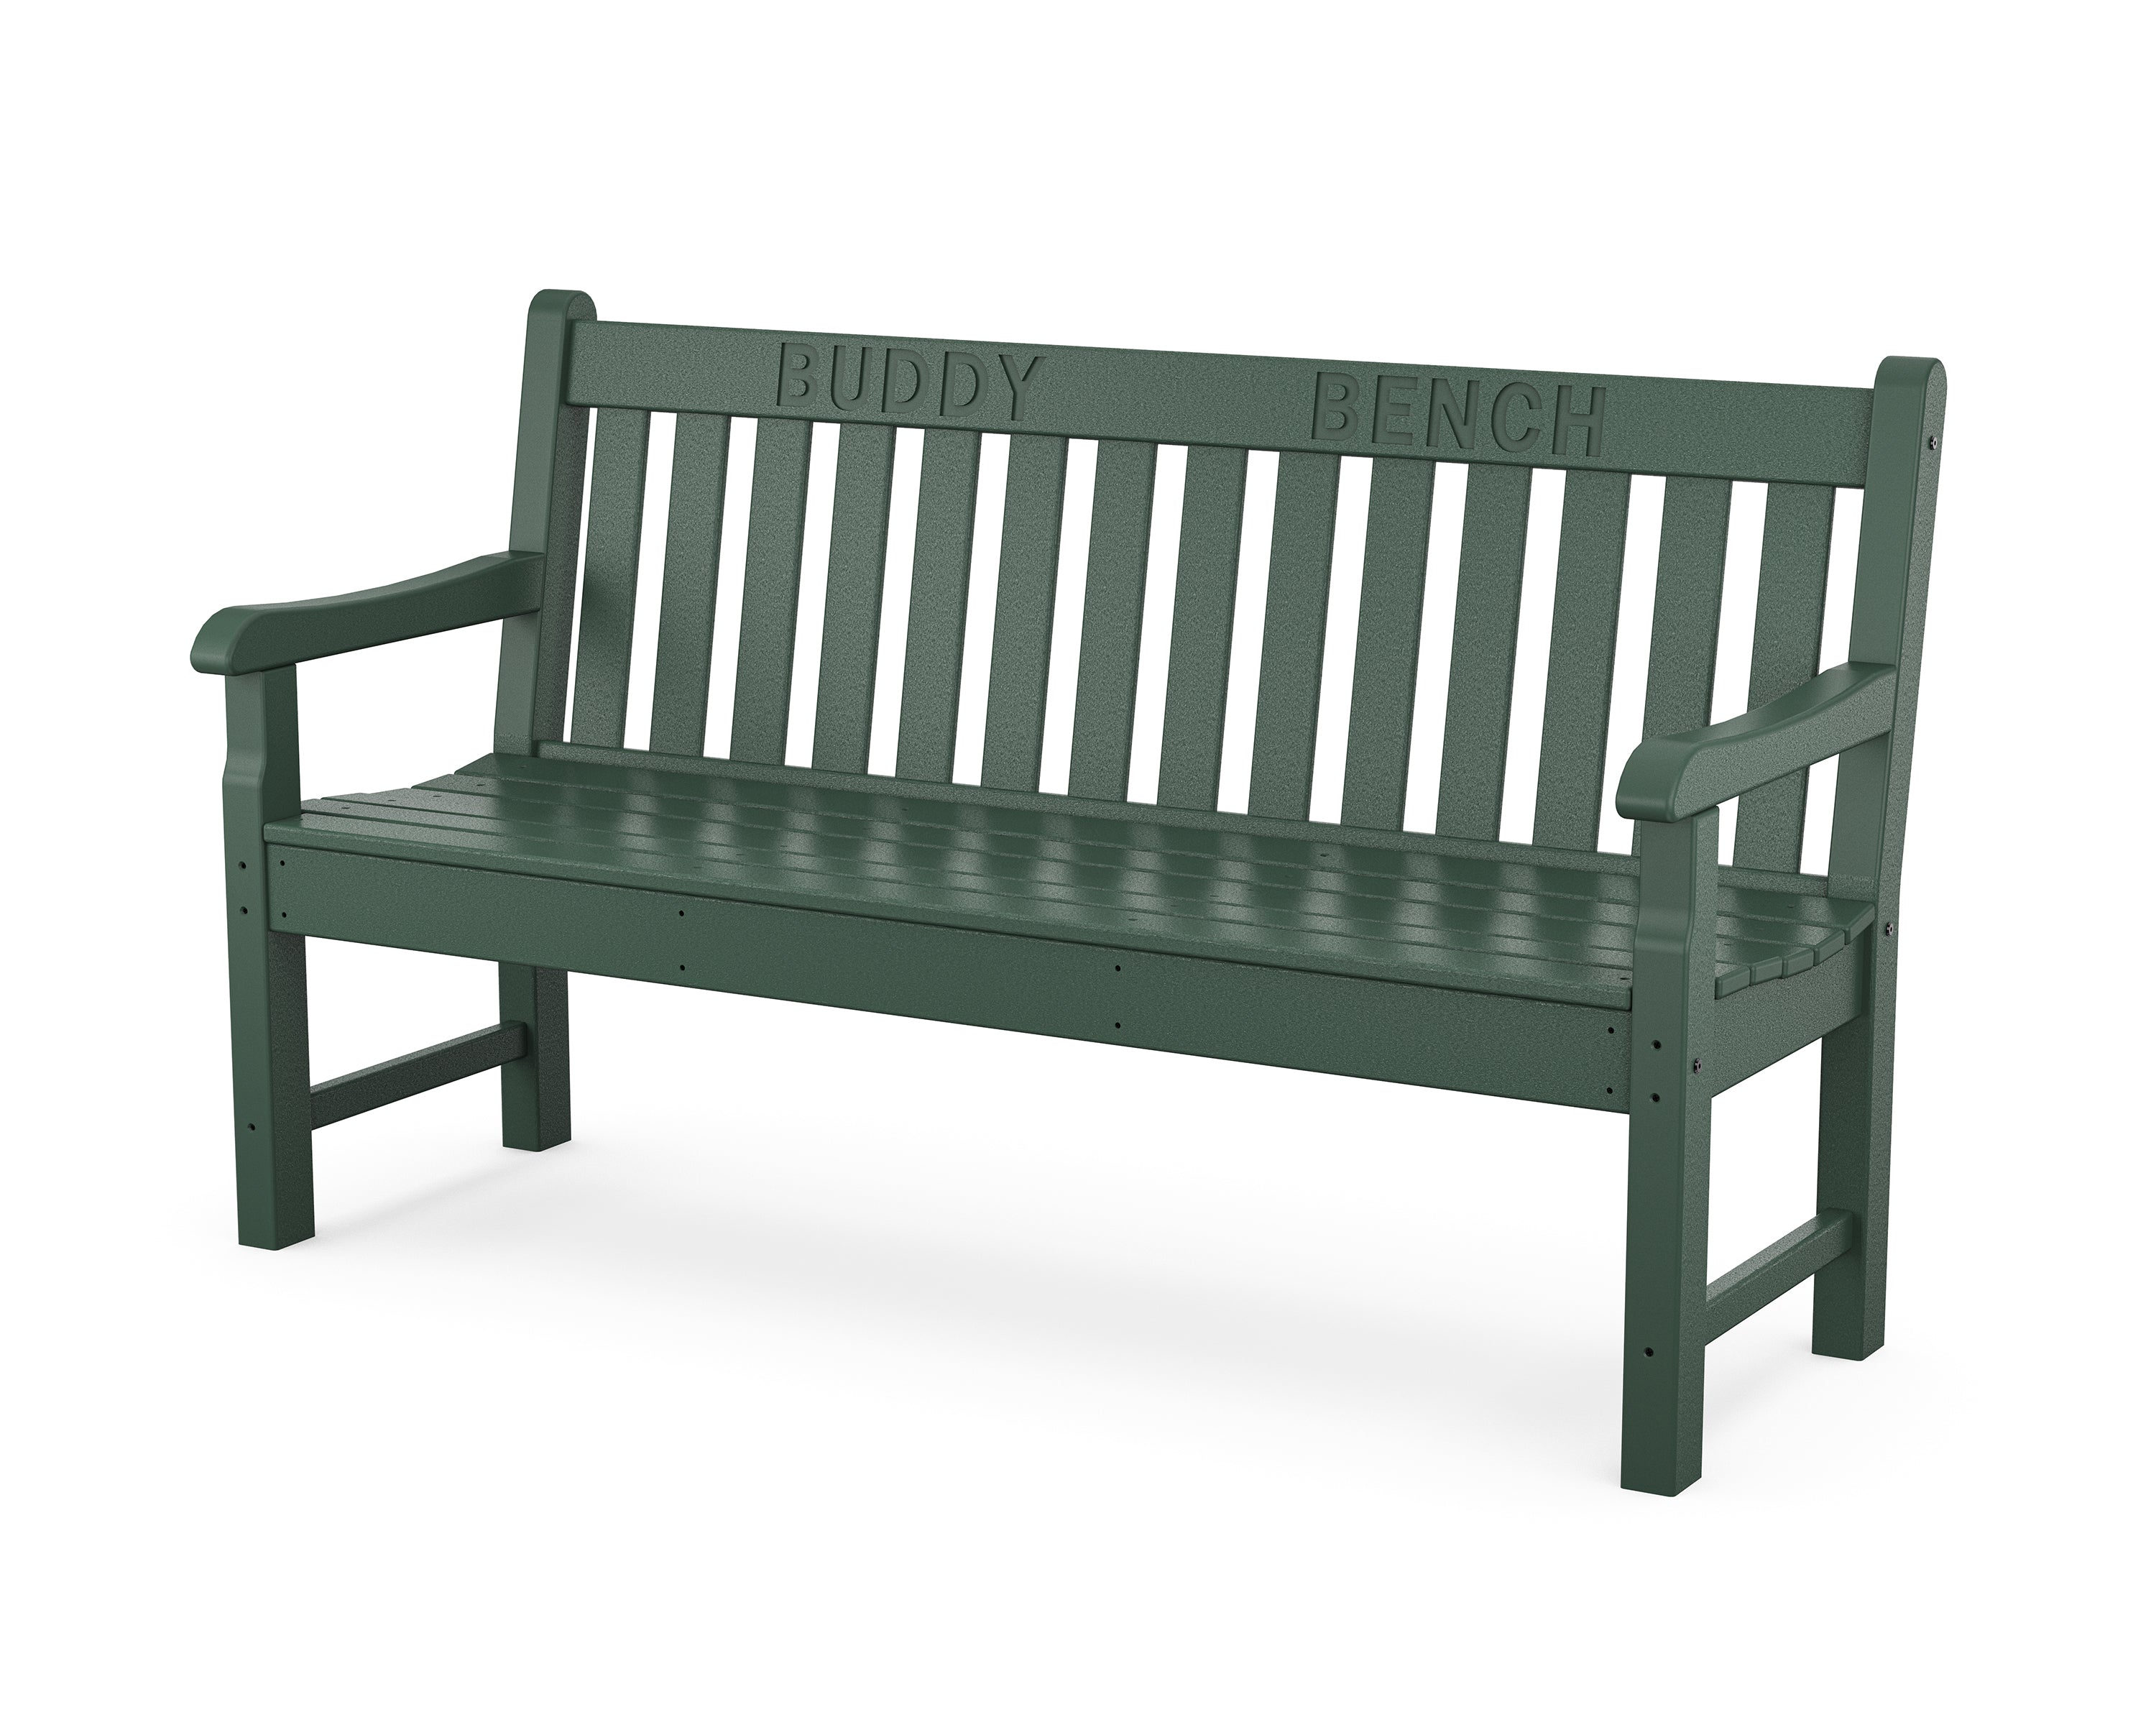 POLYWOOD® 60” Buddy Bench in Green